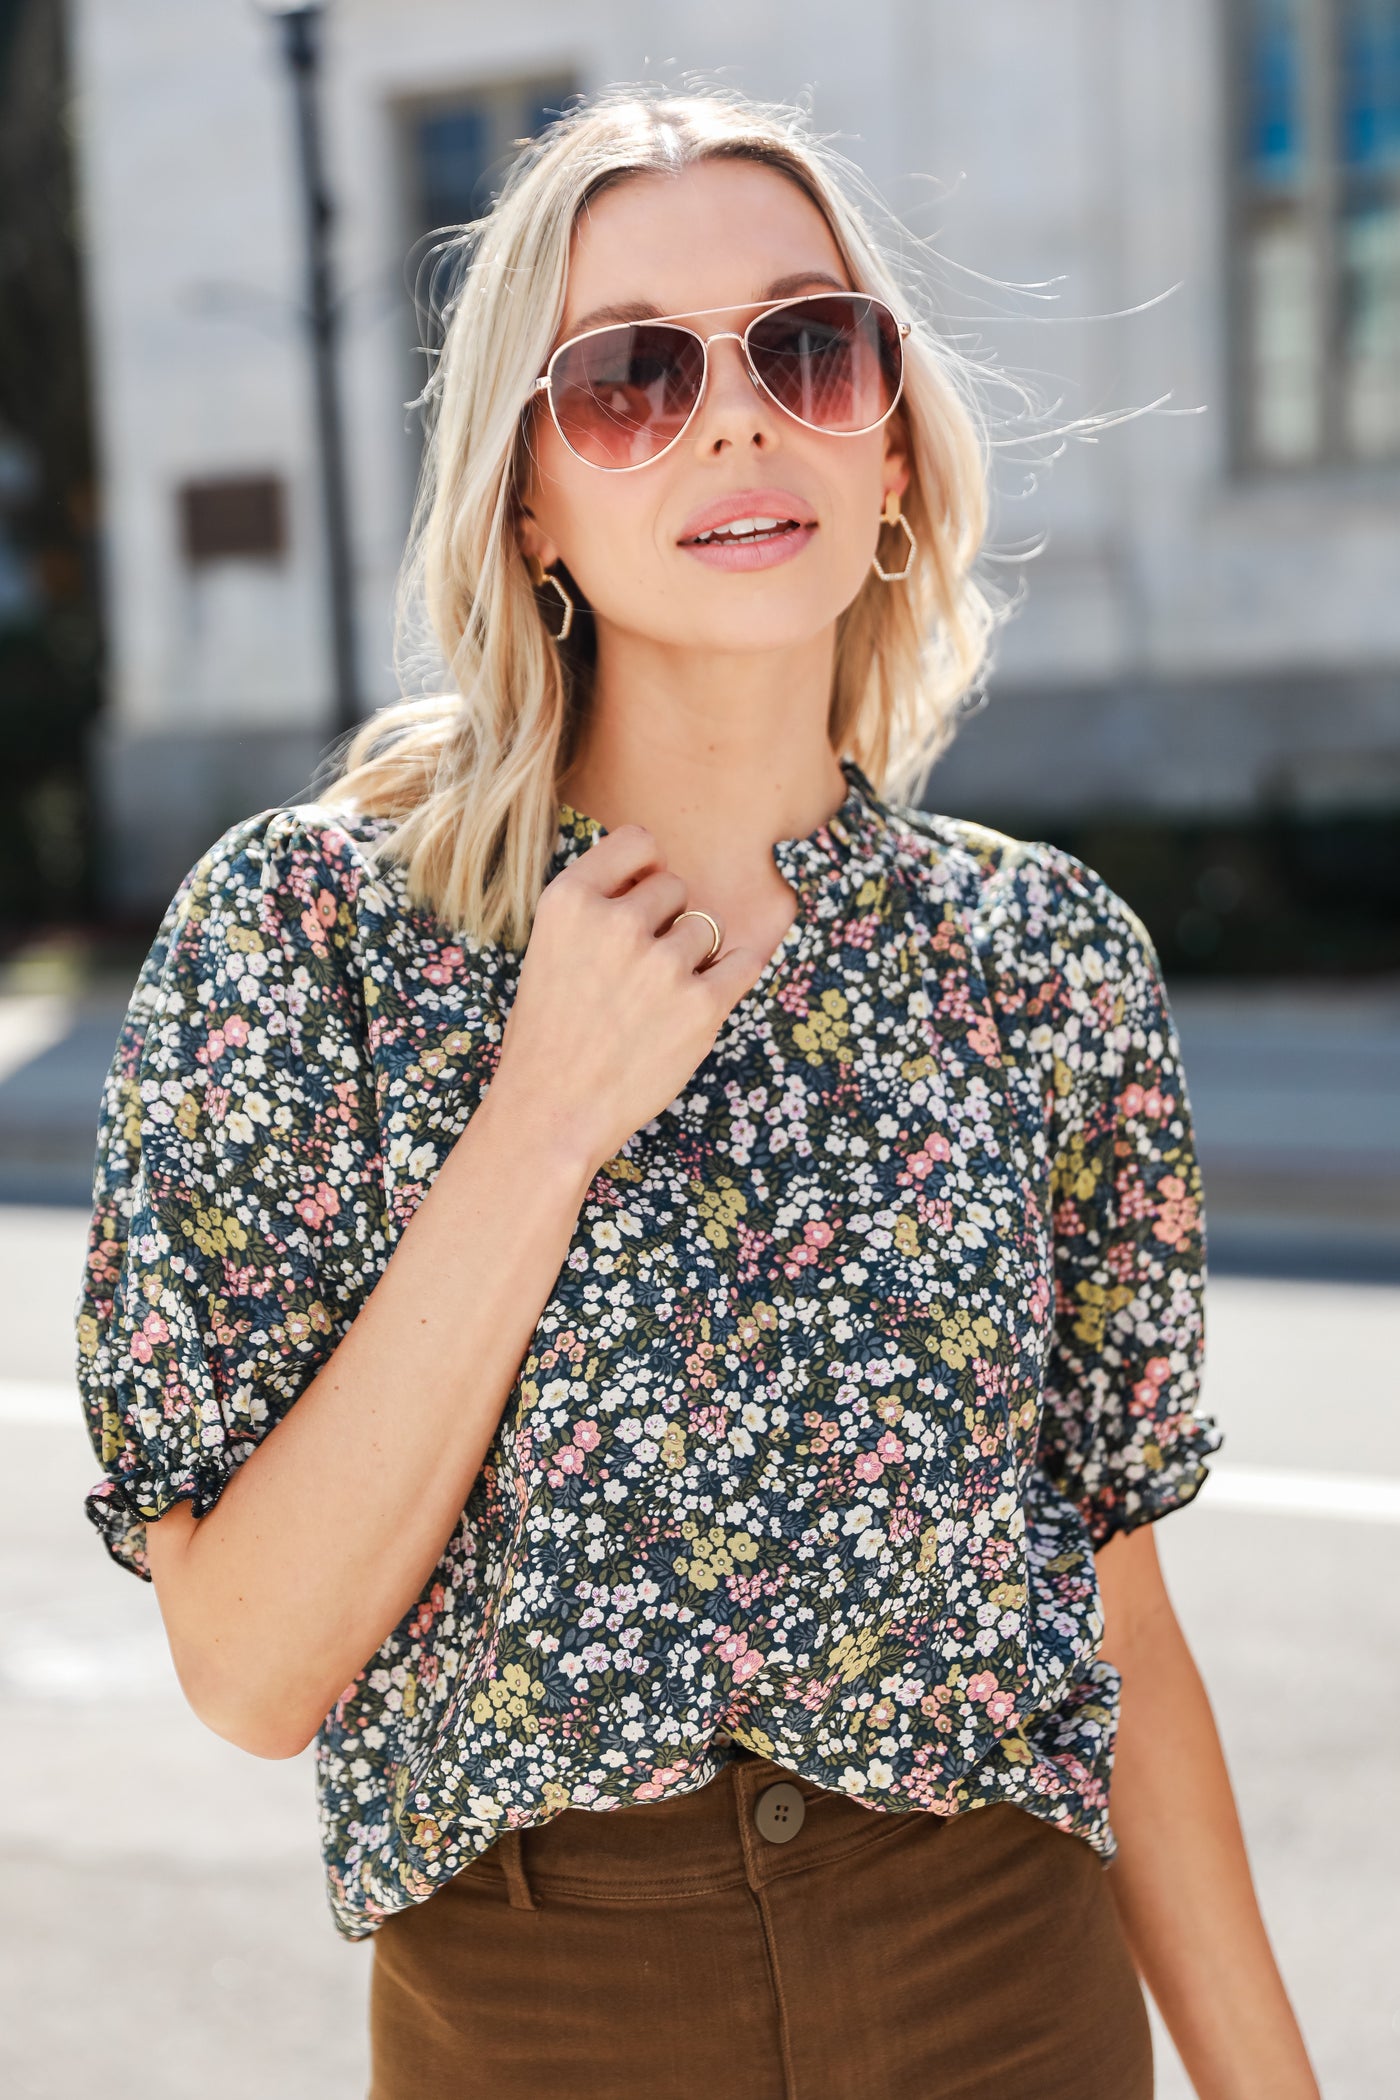 model wearing a cute navy blue Floral Blouse